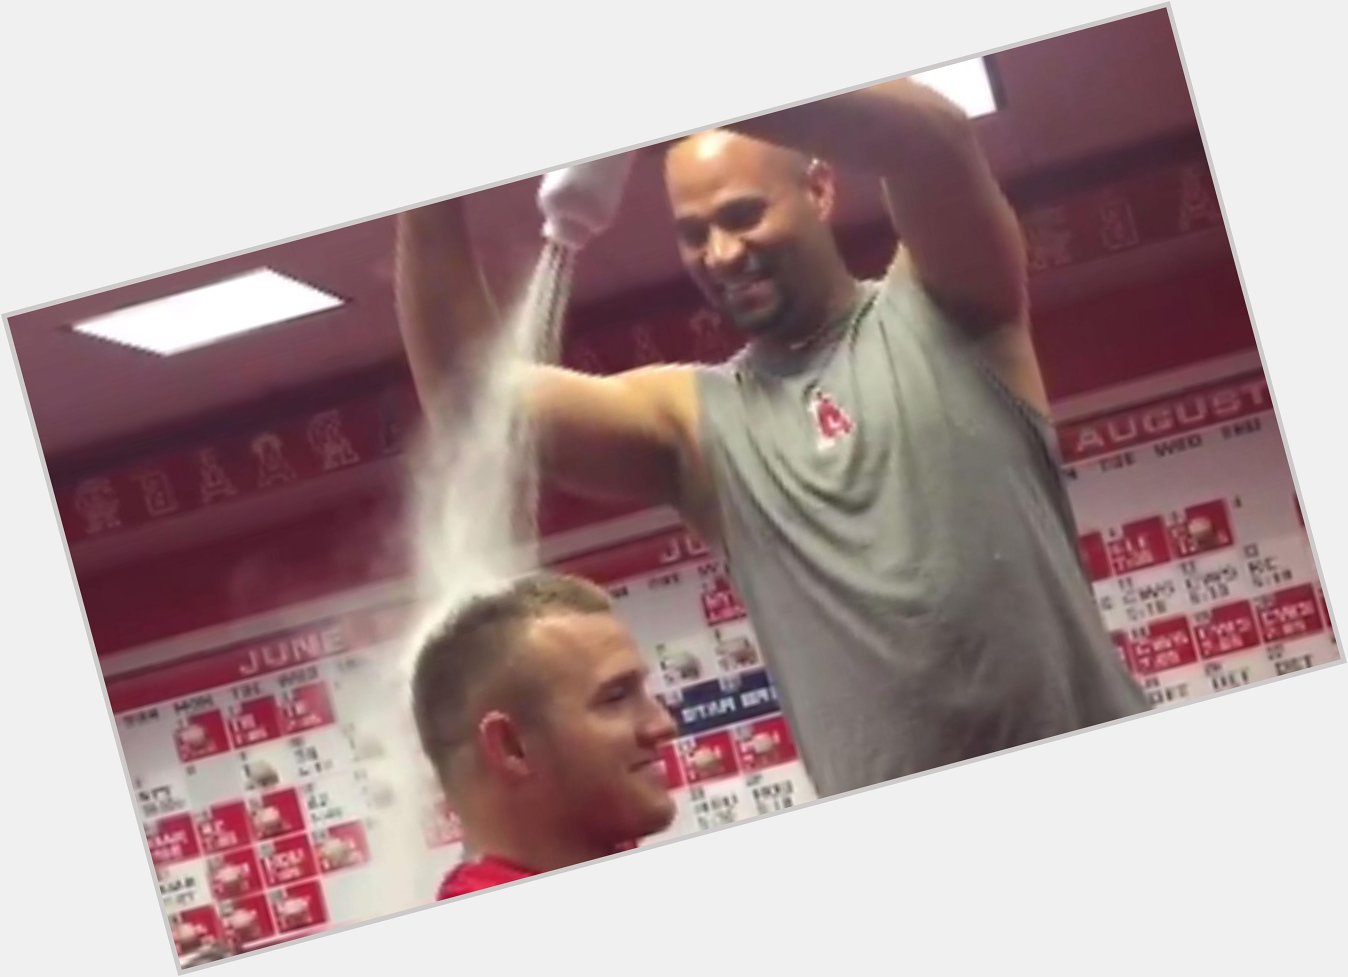 Happy birthday Mike Trout! Your gift is Albert Pujols giving you a baby powder and egg shower.  